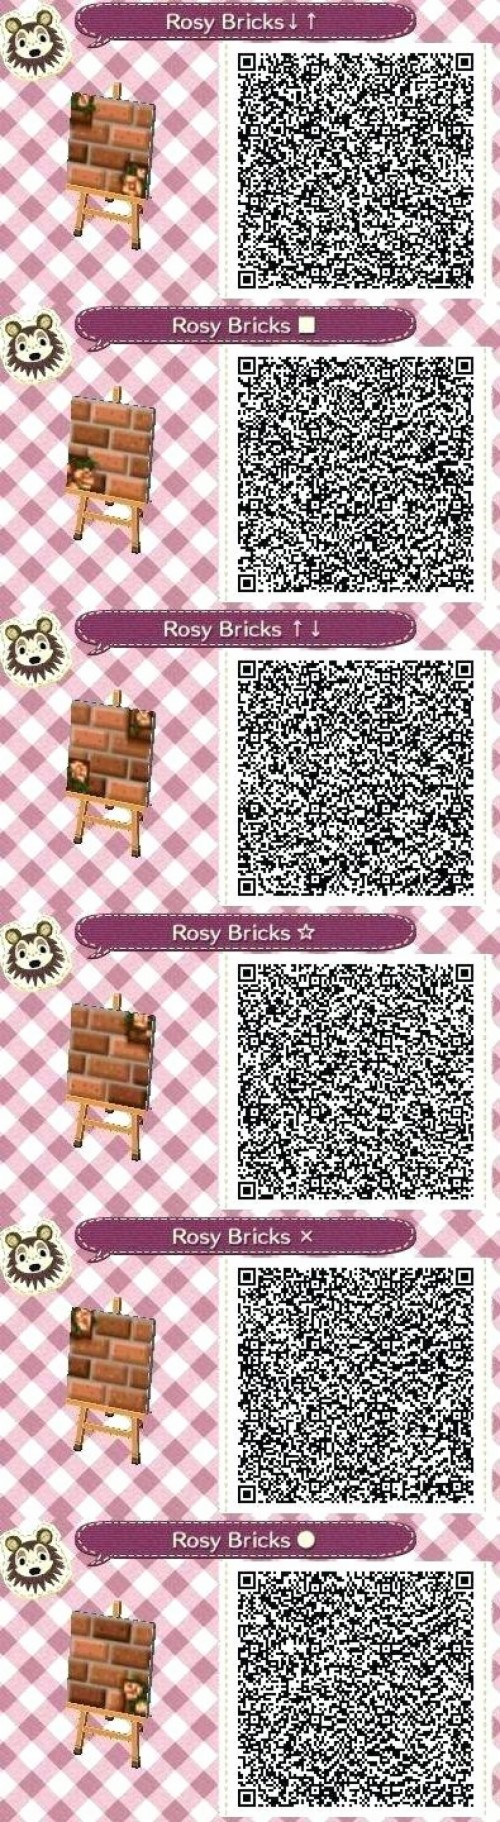 These Patterns Do Not Belong To Me Dirt Path Animal Crossing Qr